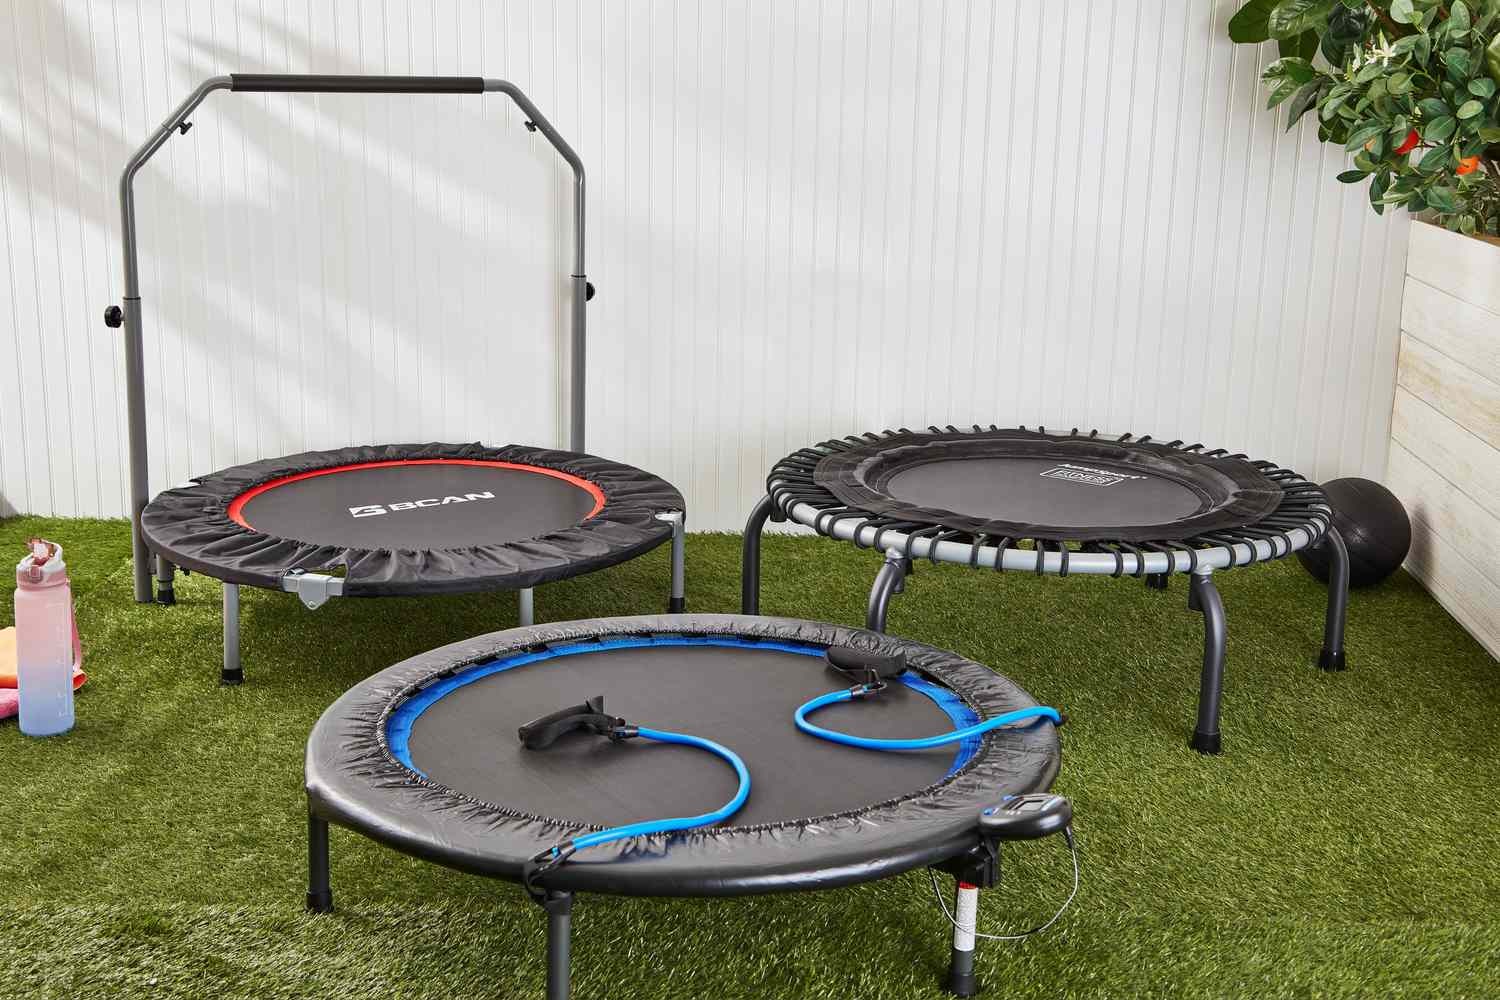 Choosing the Right Rebounder: A Comprehensive Buying Guide